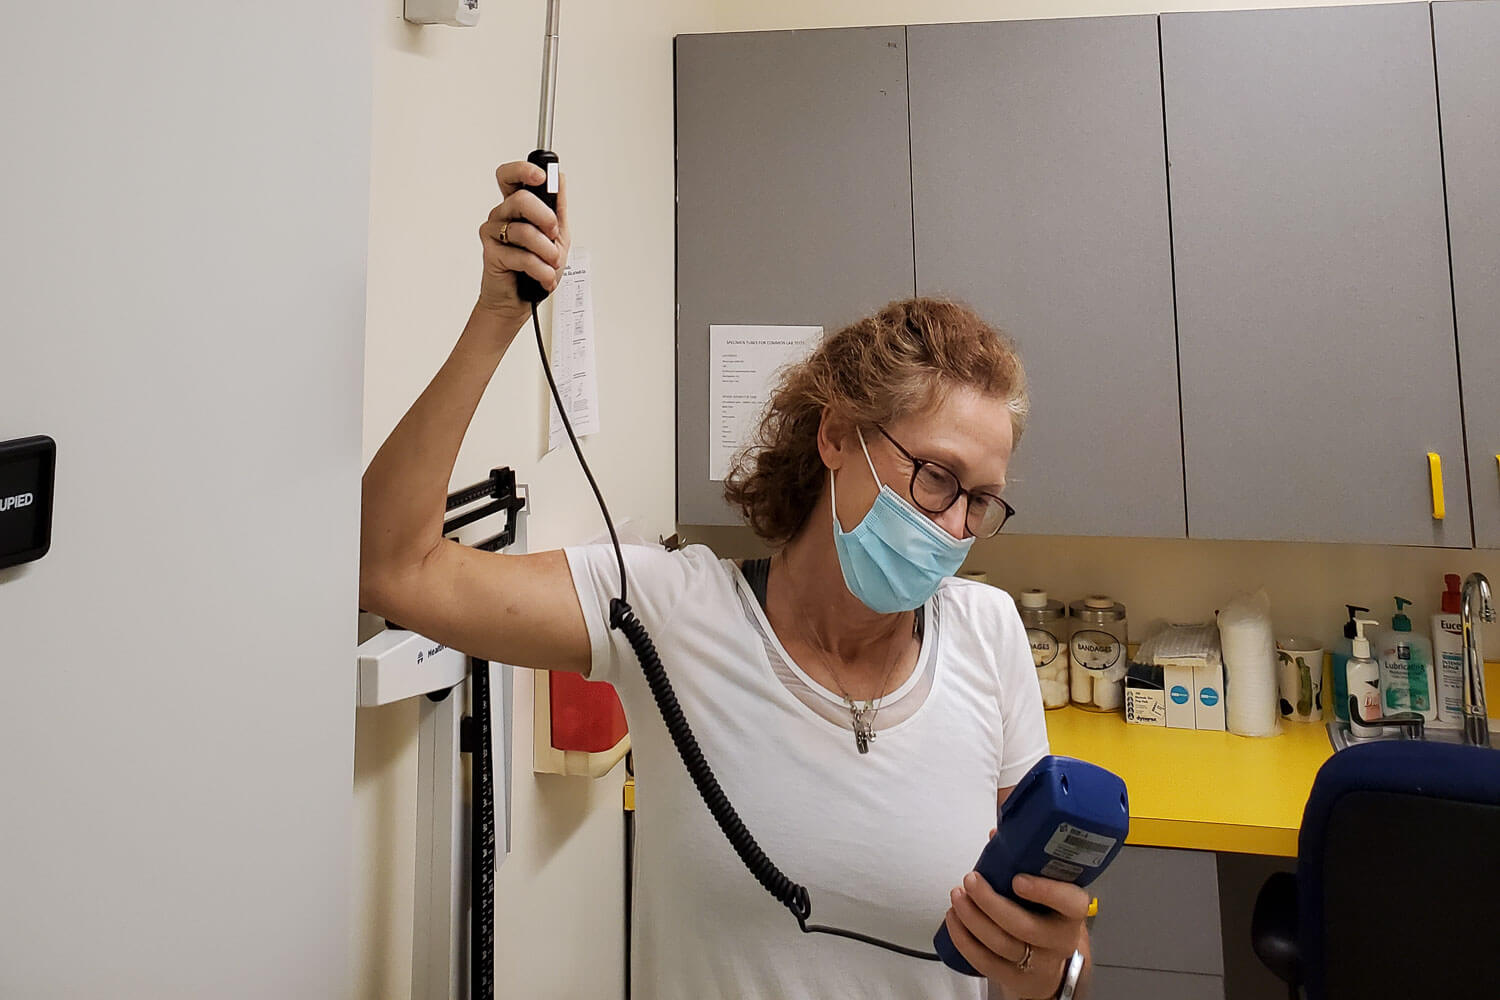 Carrie Sadovnik, COVID-19 Response Team Chair and Director of Environmental Health and Safety, testing air quality. She has been instrumental in preparing the campus for re-entry.